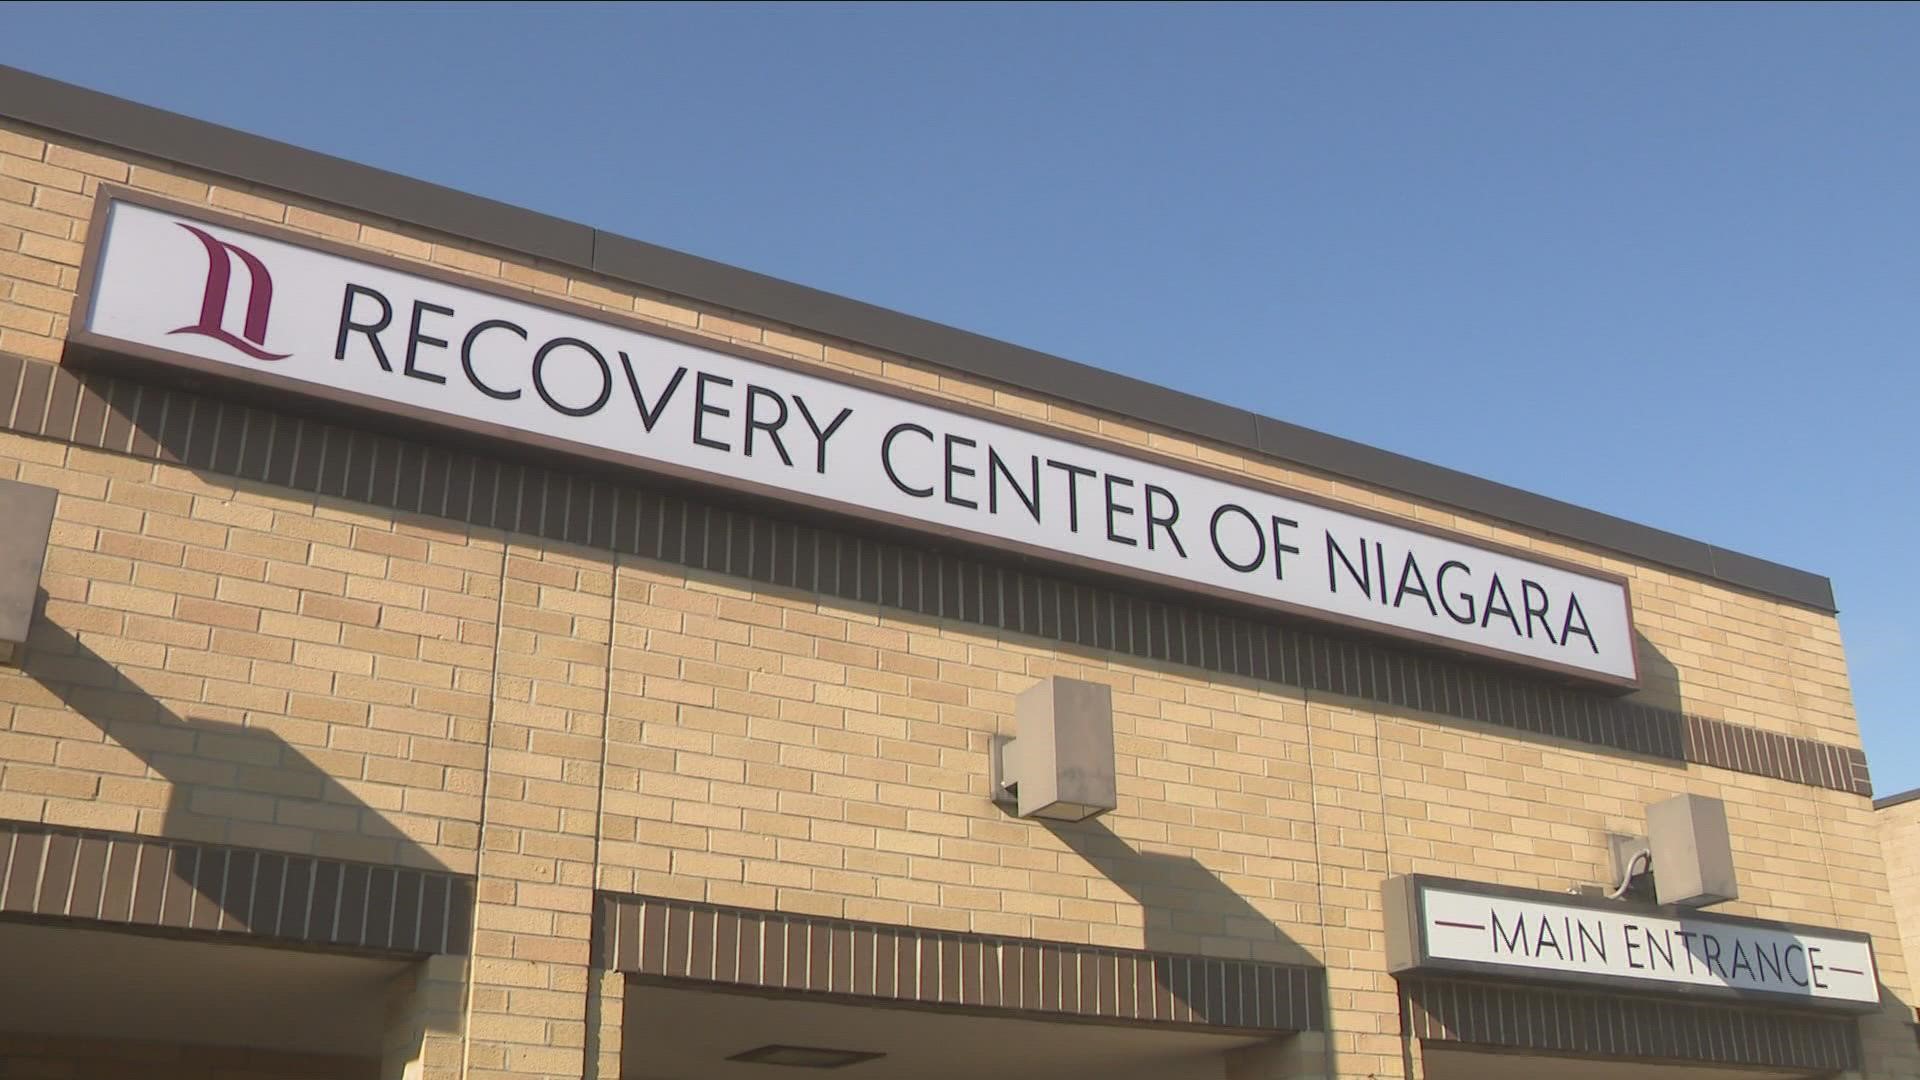 A ribbon-cutting was held Thursday for the Recovery Center of Niagara, which will open to patients next month.